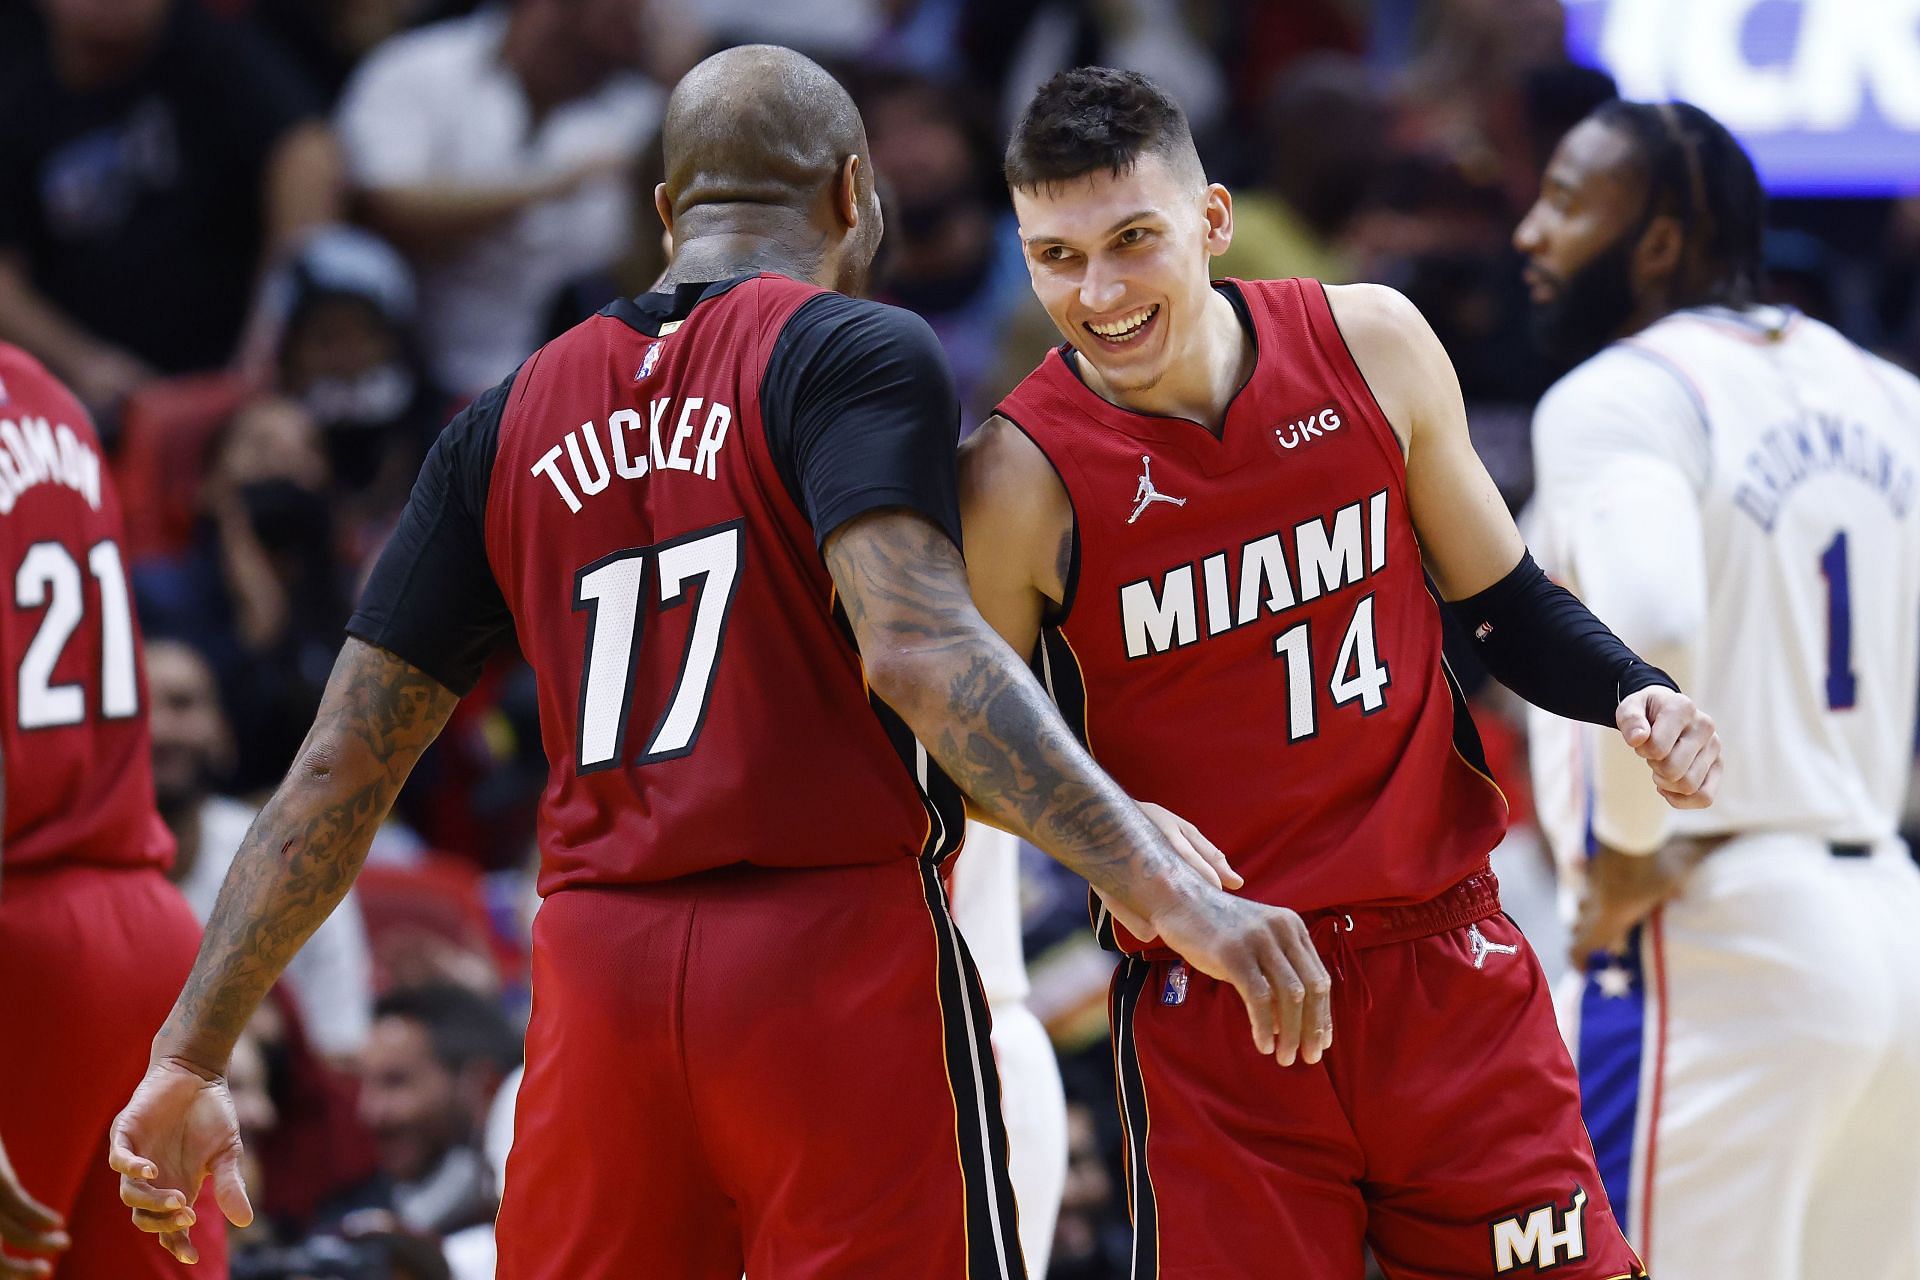 Miami Heat guard Tyler Herro is a favorite for Sixth Man of the Year